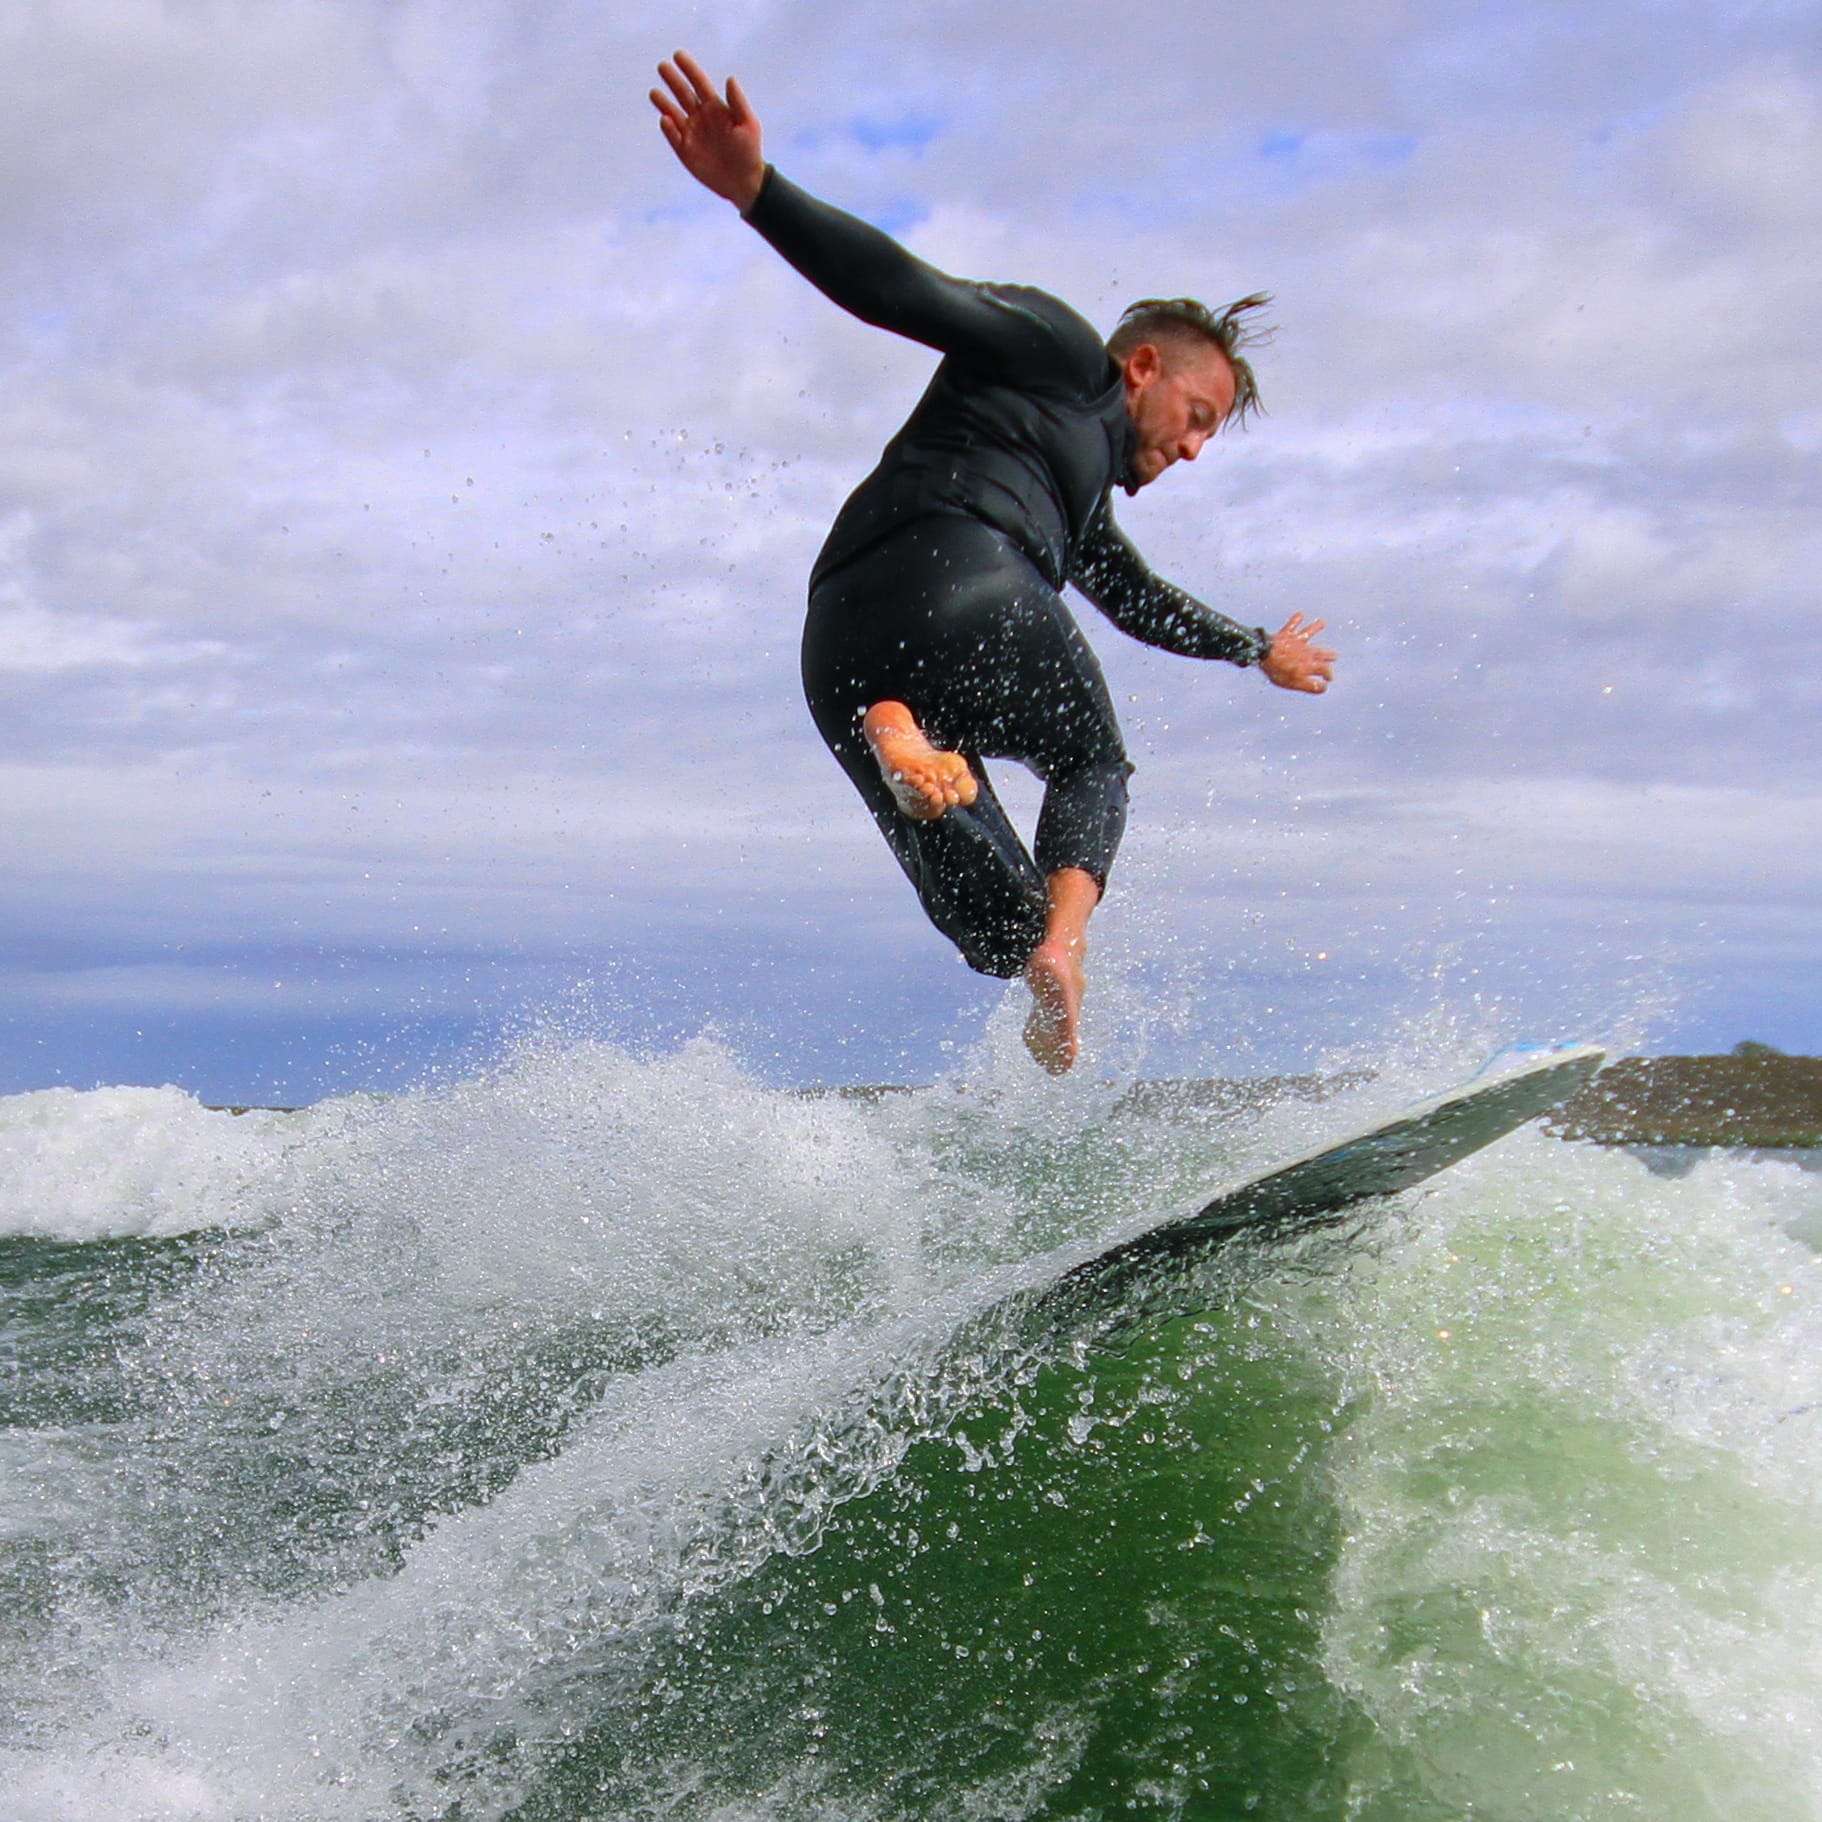 A man is riding a wave on a surfboard.